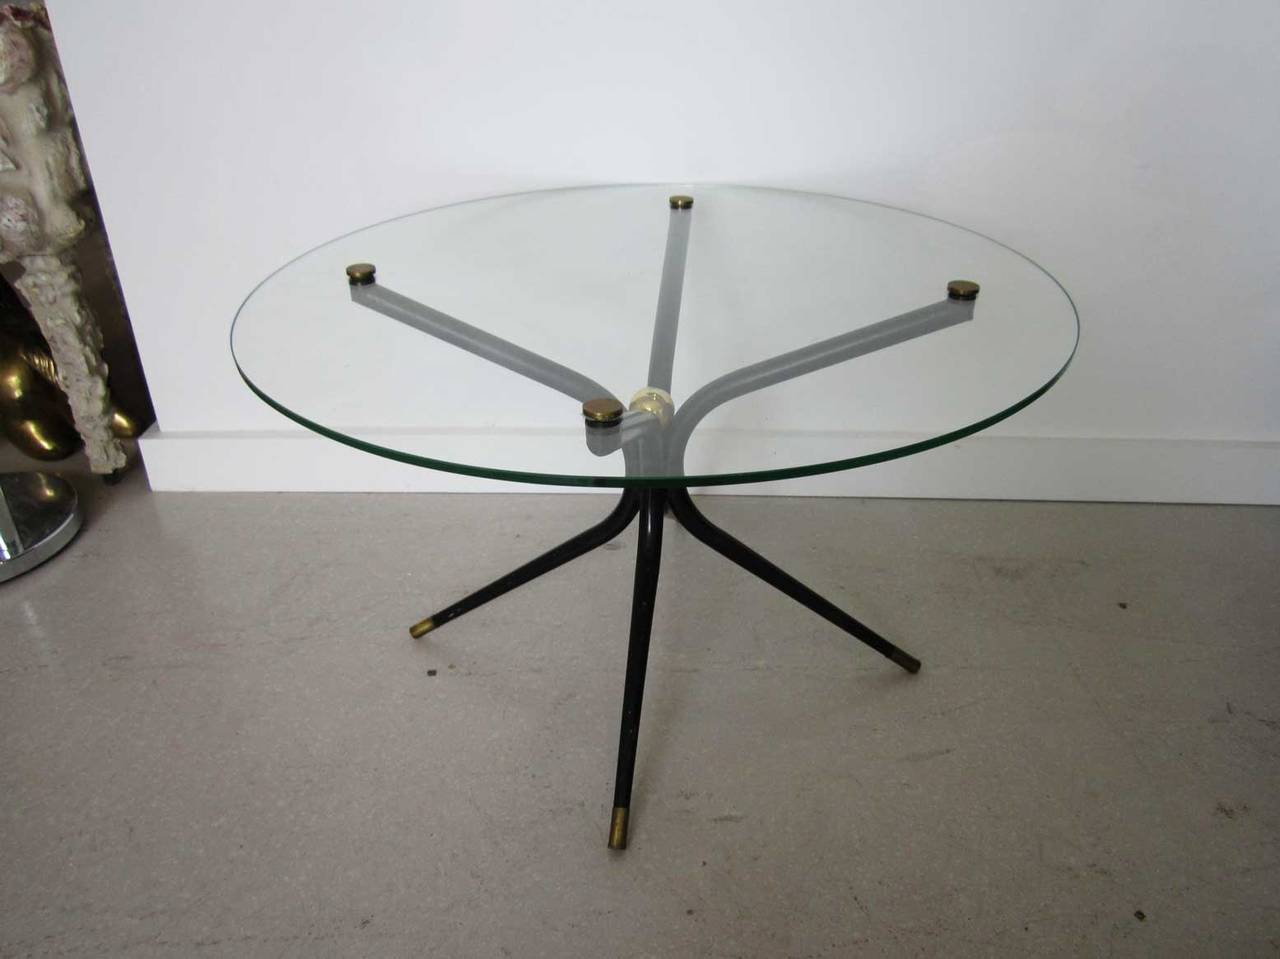 Circular  table with a black sprawling spider like base and brass accents.